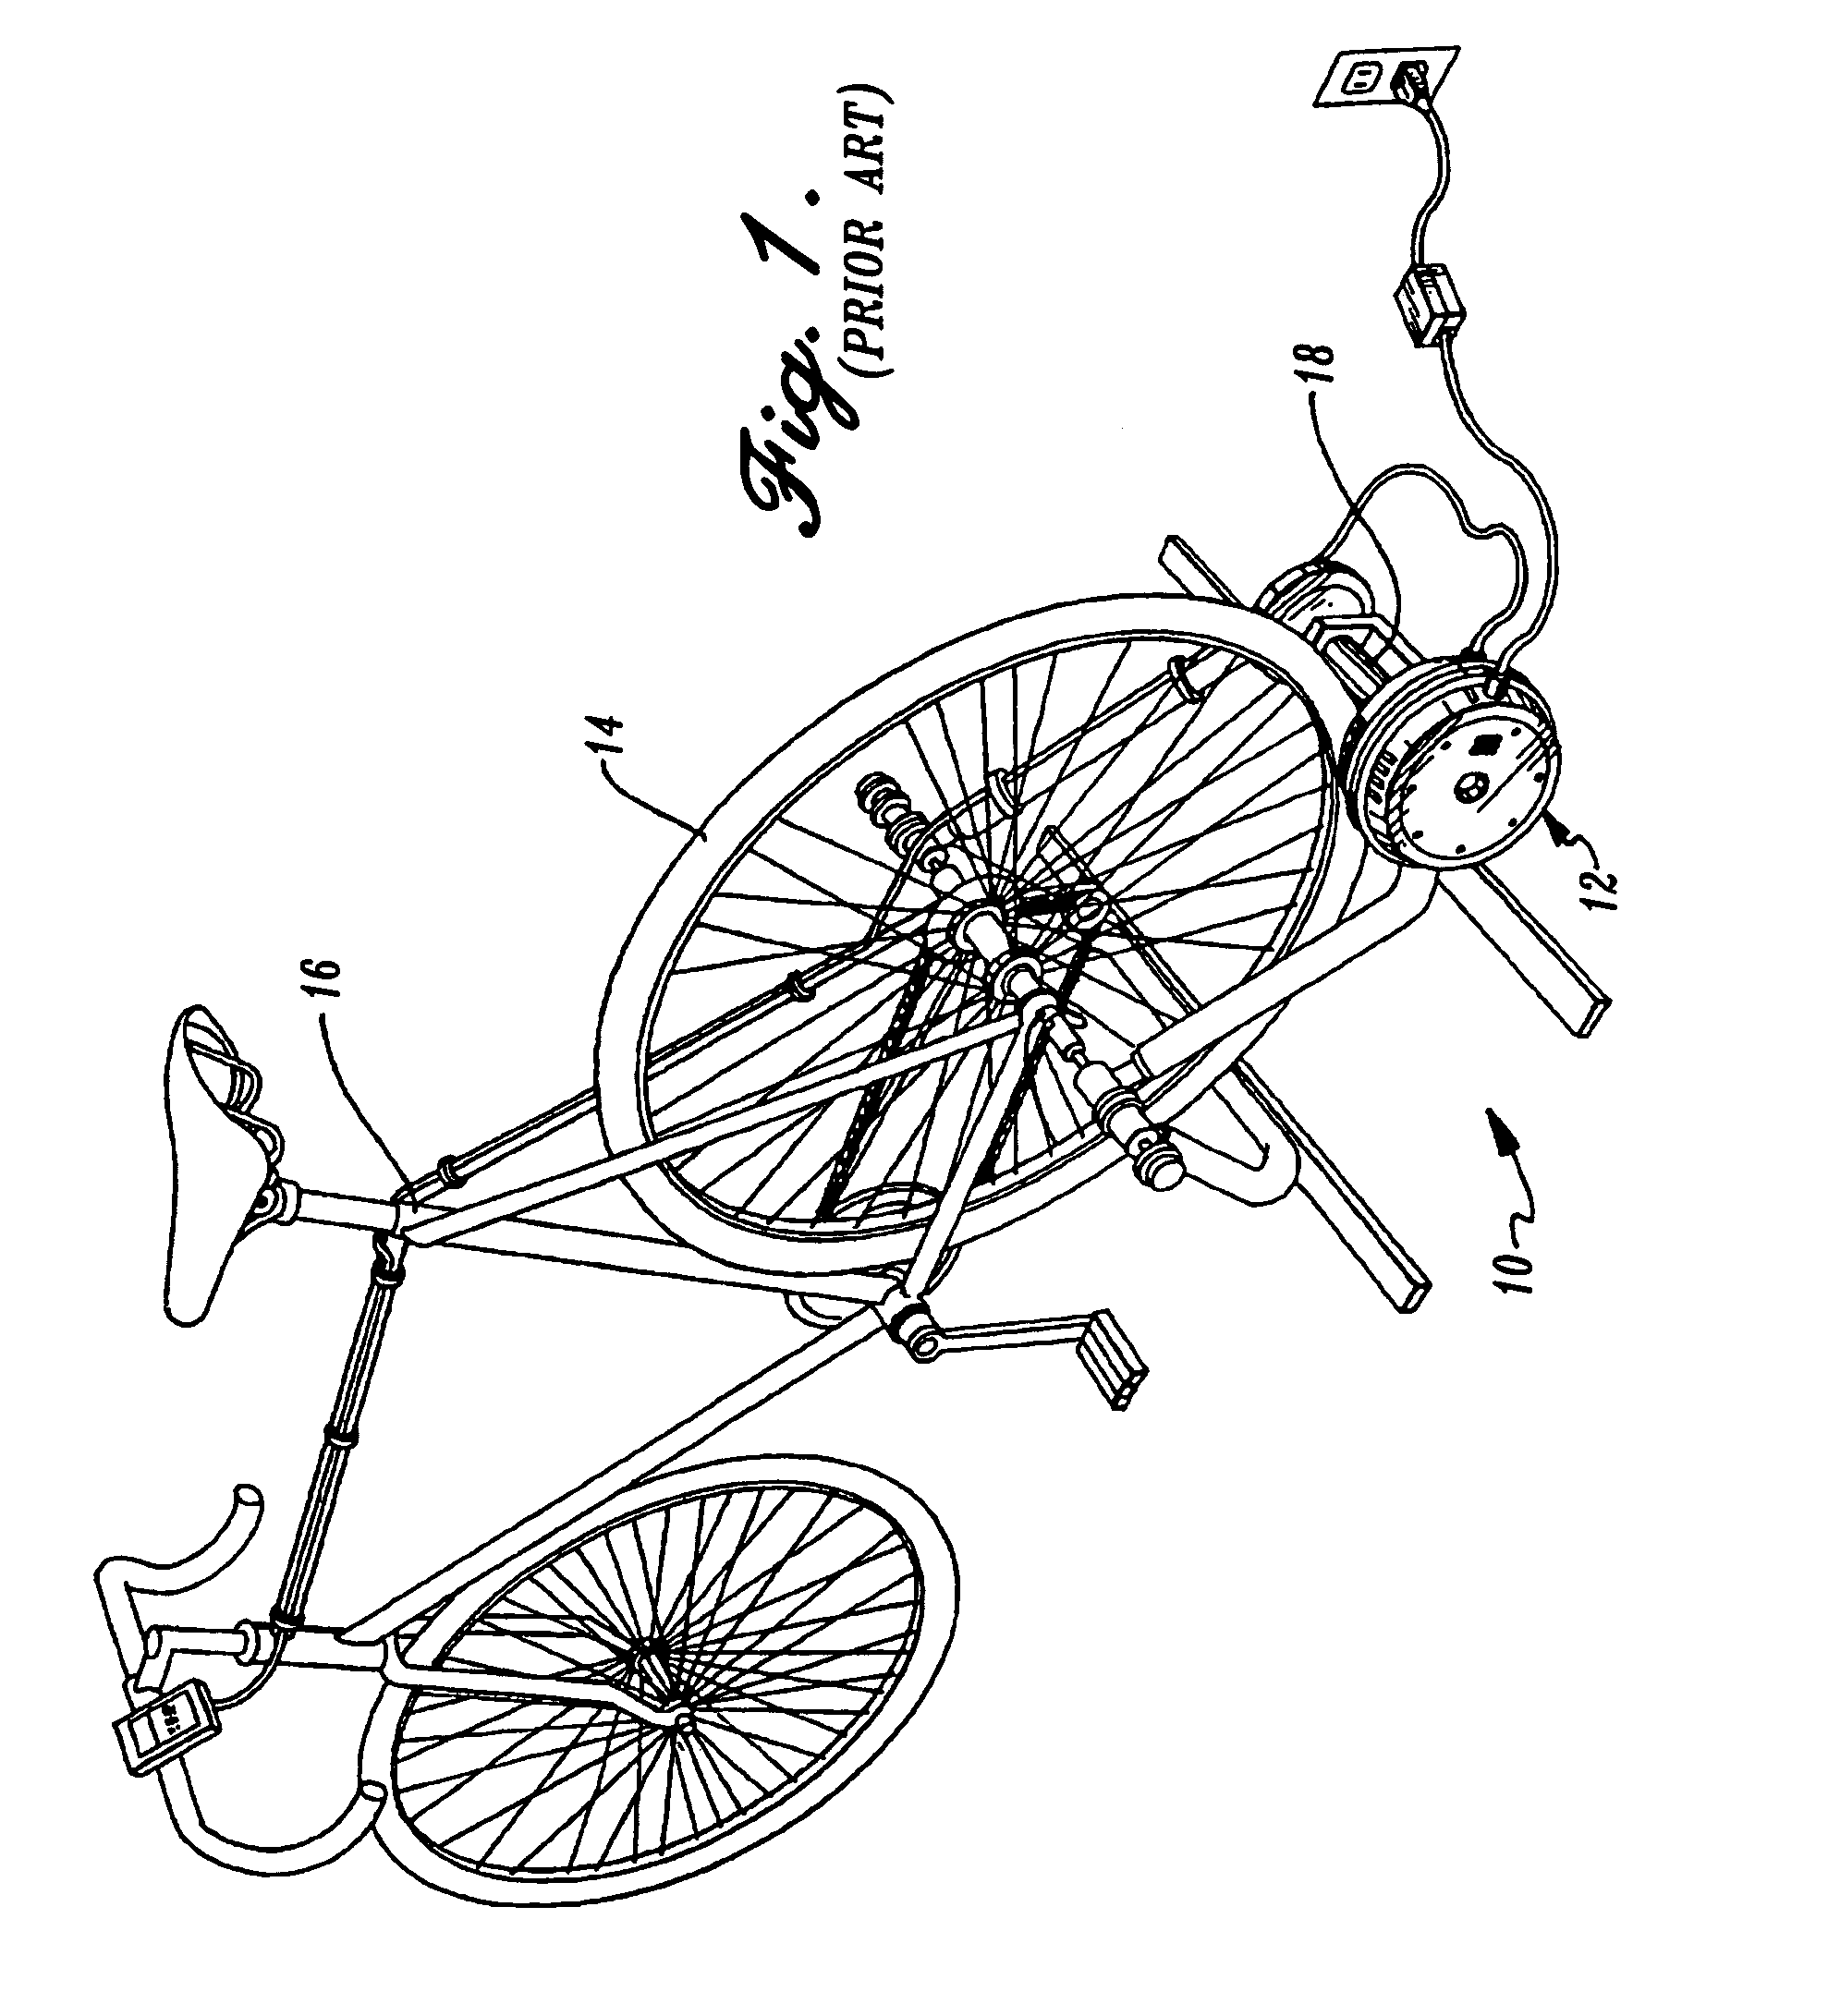 Resistance exercise apparatus and trainer